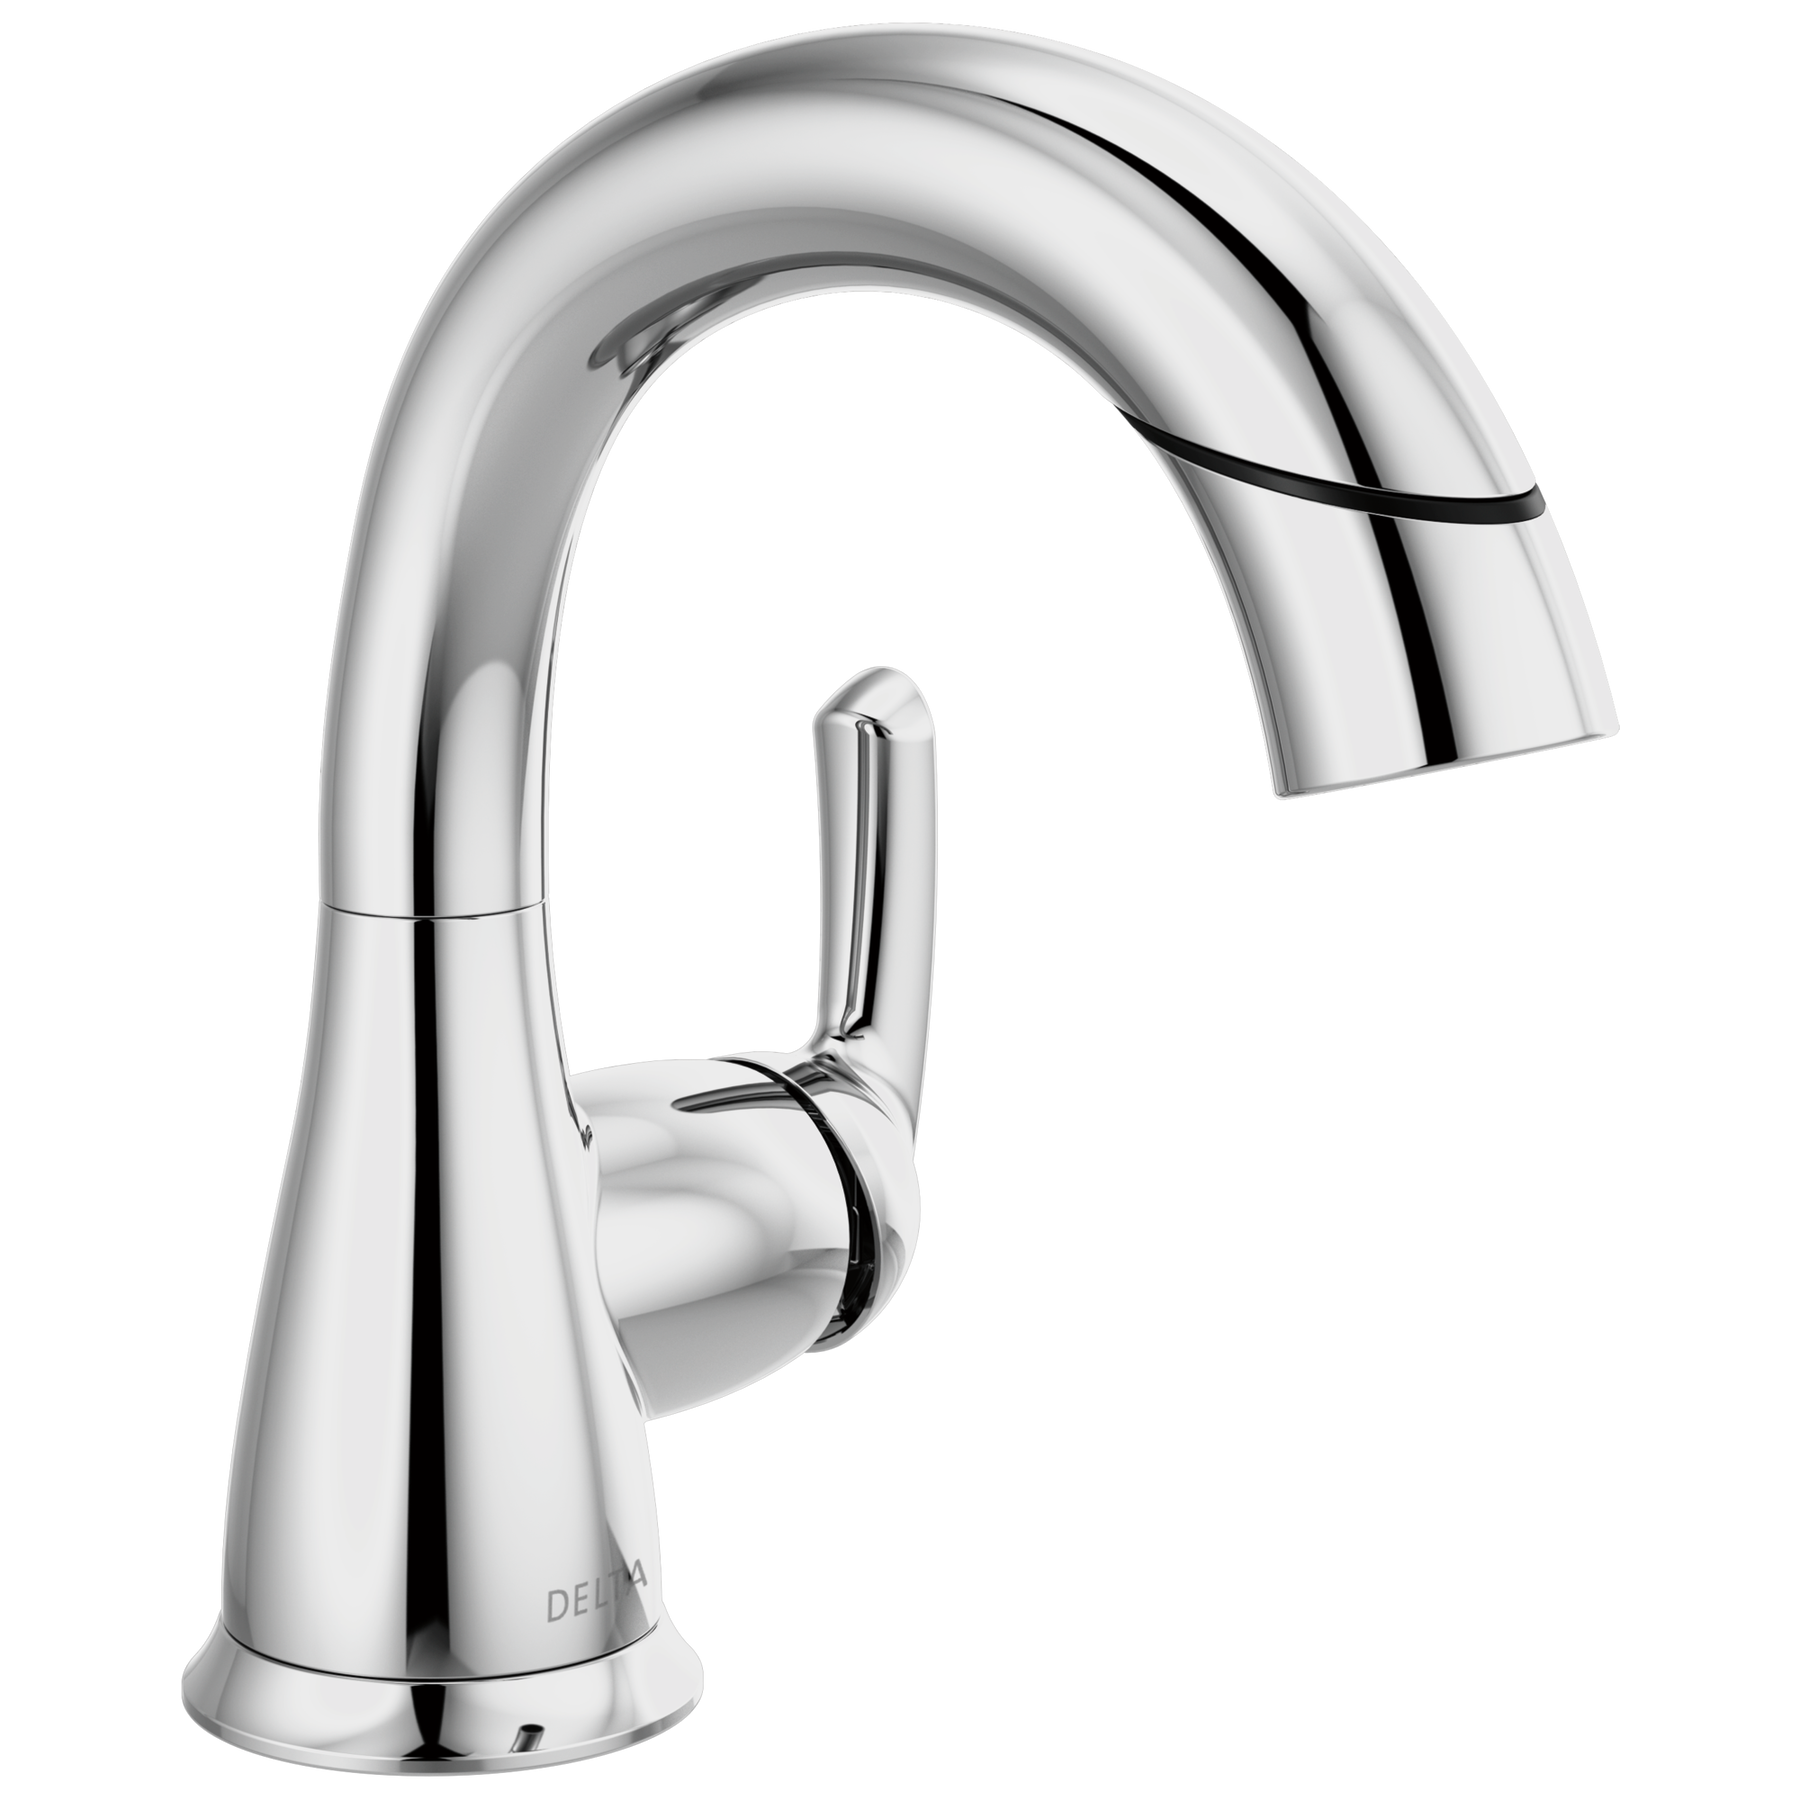 Single Handle Pull-Down Bathroom Faucet in Chrome 15765LF-PD